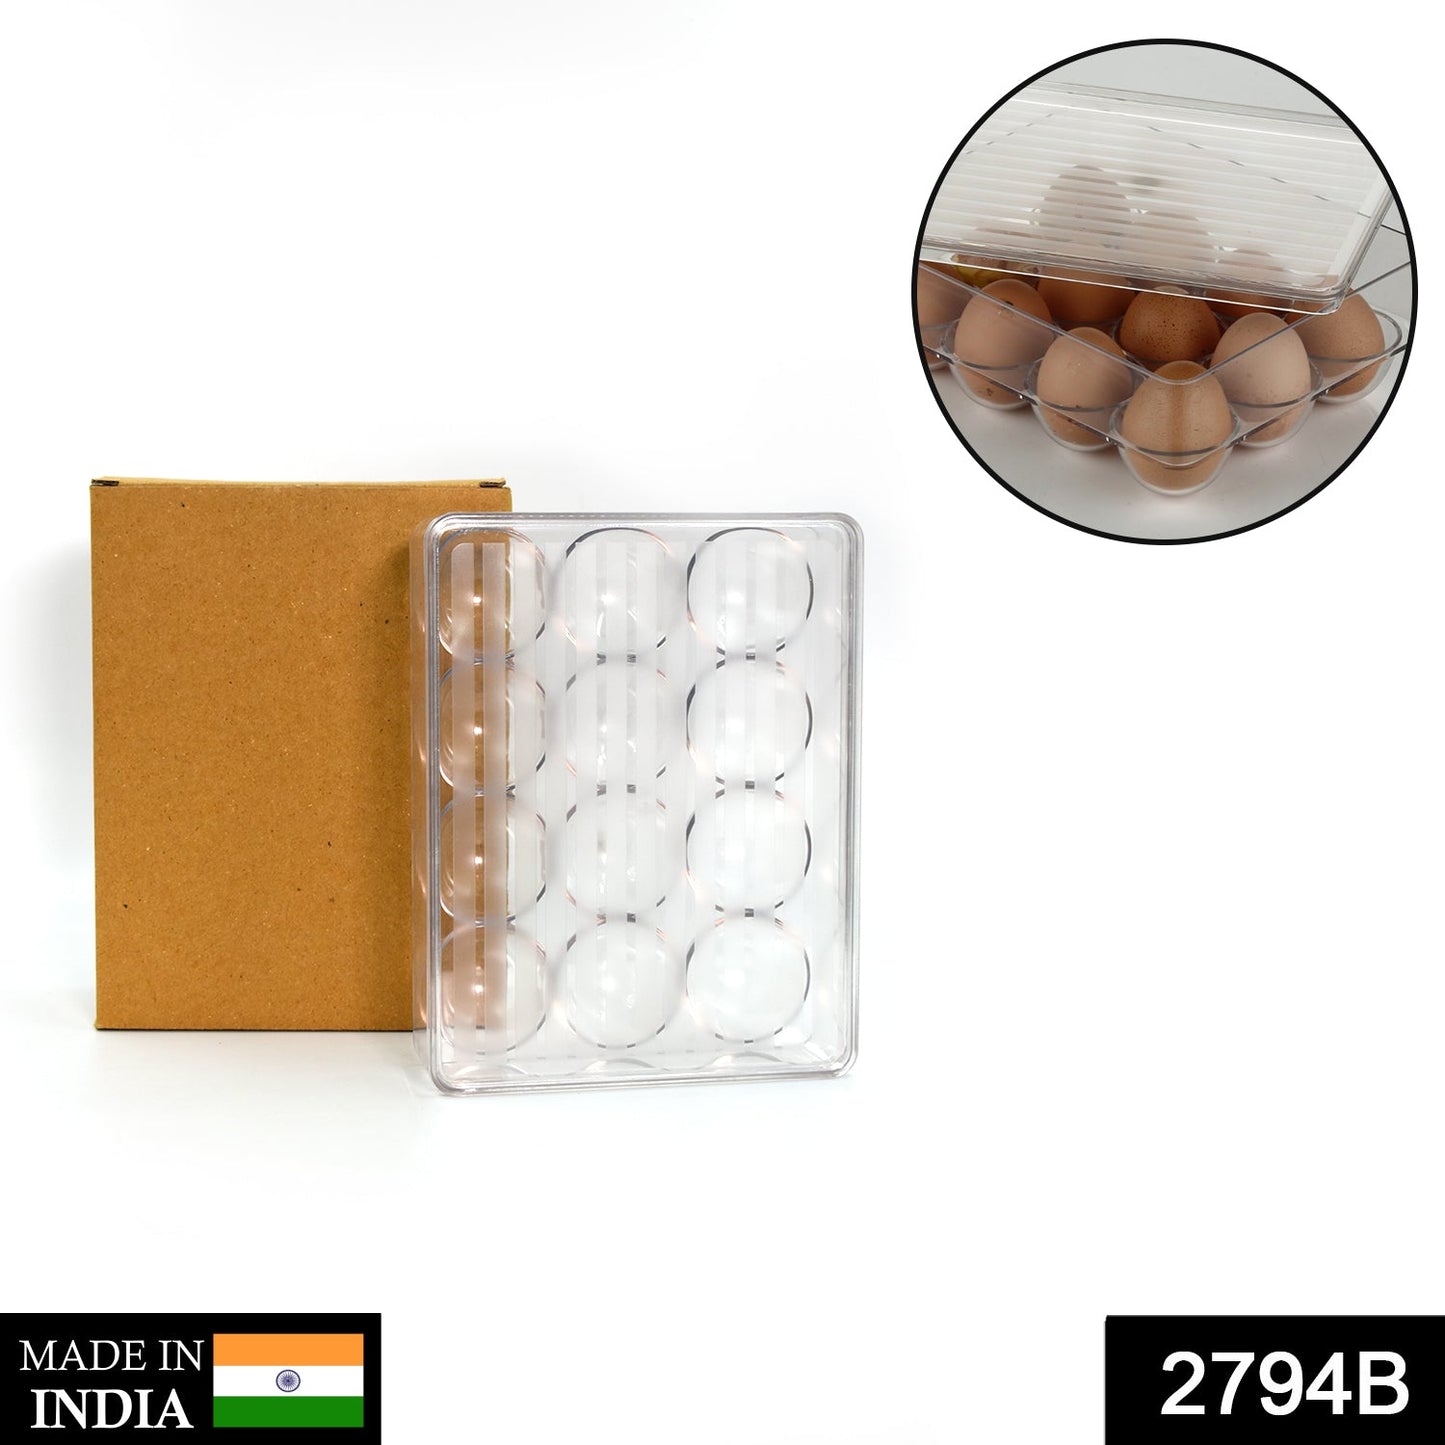 2794B 12 Cavity Egg Storage Box For Holding And Placing Eggs Easily And Firmly.